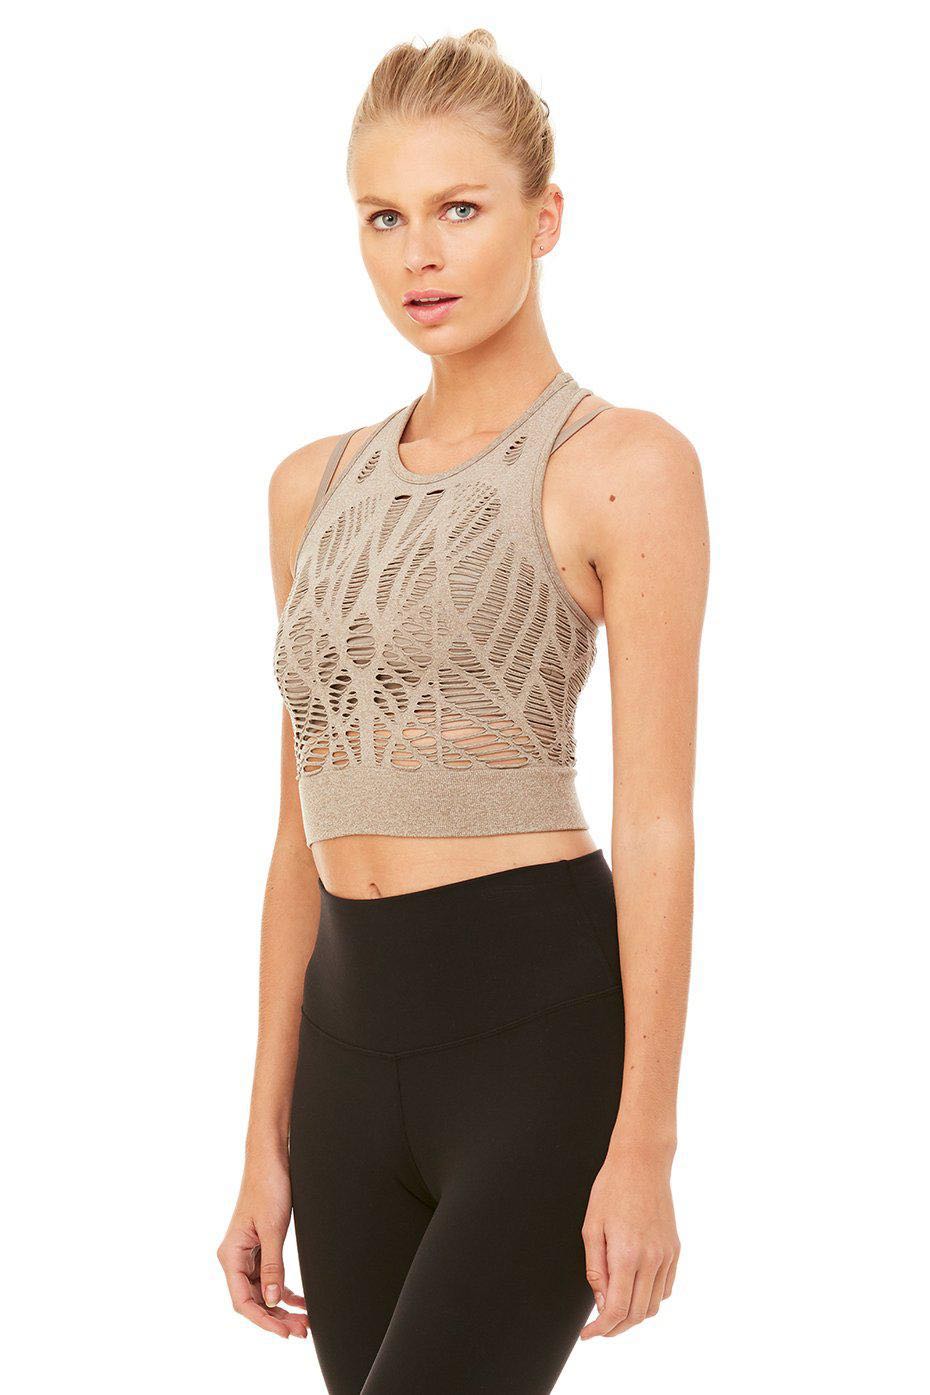 Alo Yoga Vixen Fitted Crop Tank (gravel, size M), Women's Fashion,  Activewear on Carousell